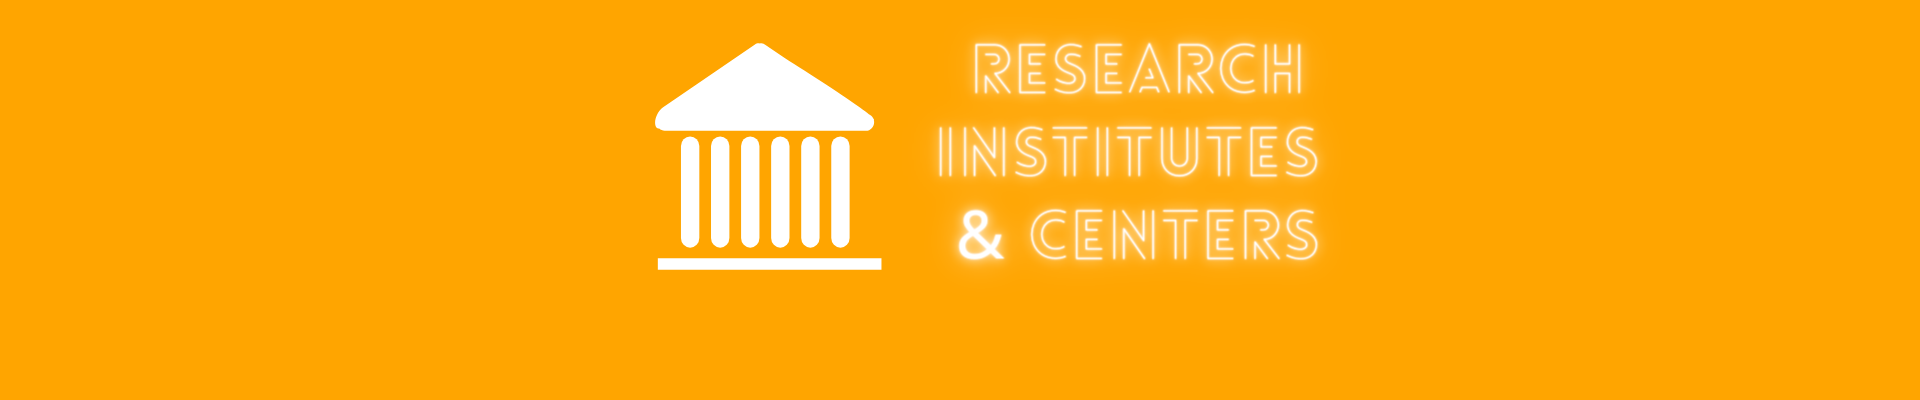 Research Institutes & Centers